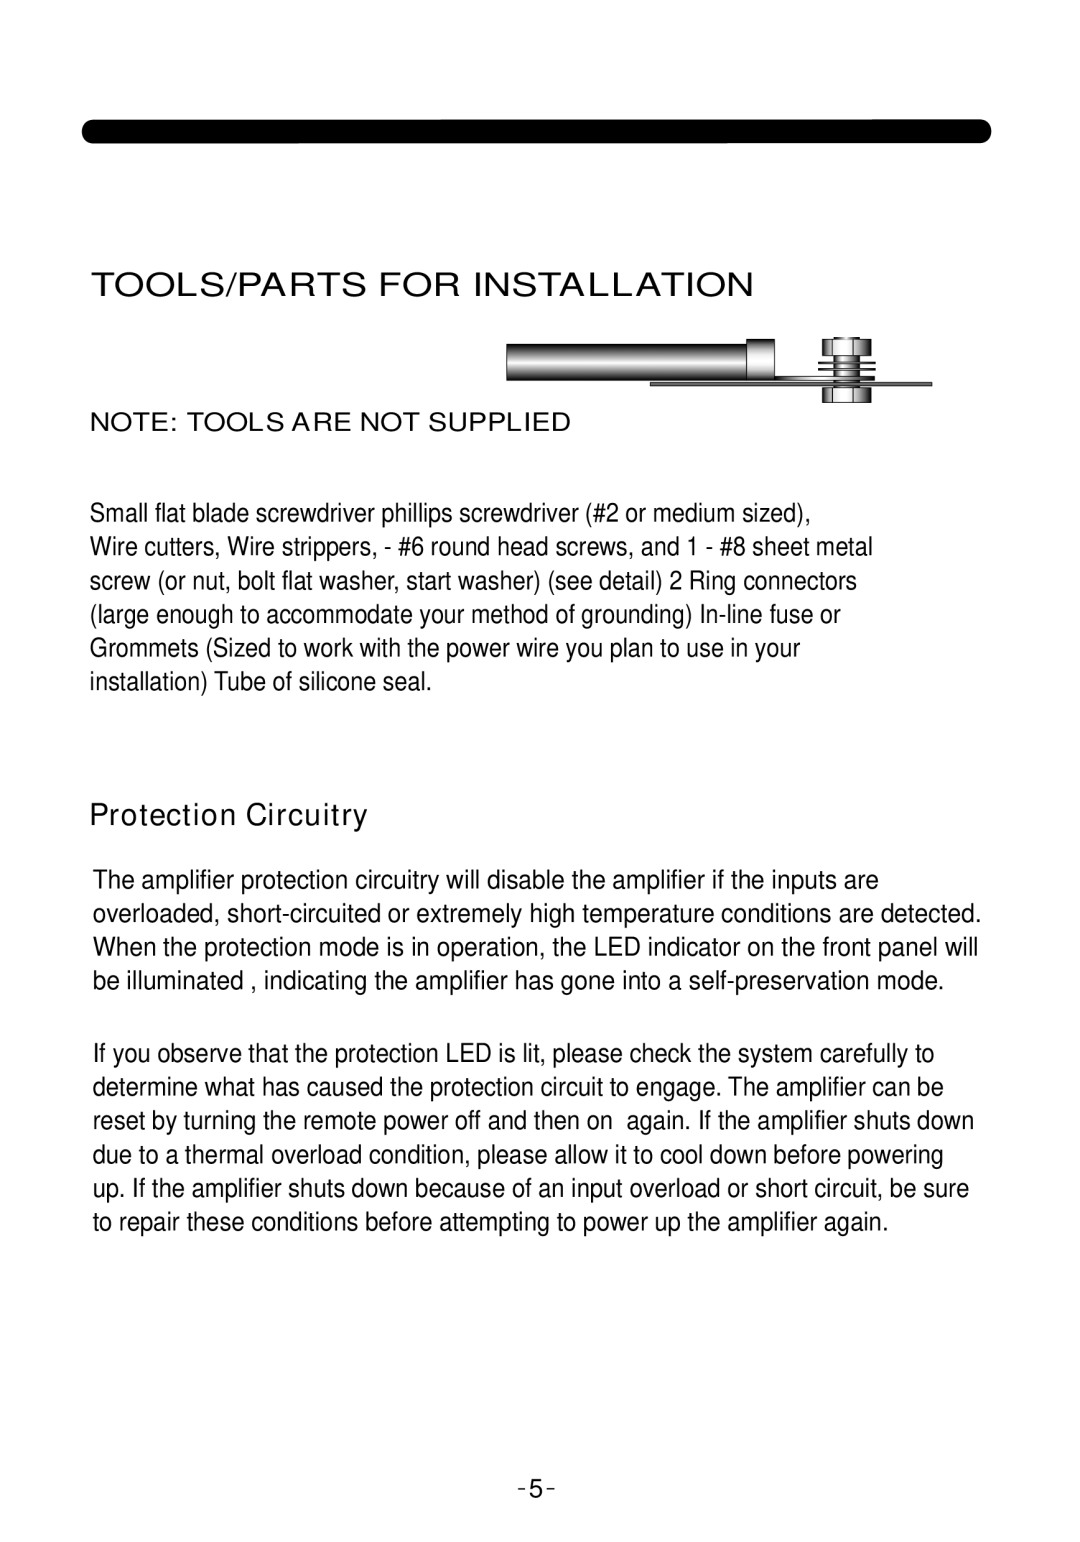 Soundstream Technologies LW1.1700D Protection Circuitry, Note Tools Are Not Supplied, Tools/Parts For Installation 